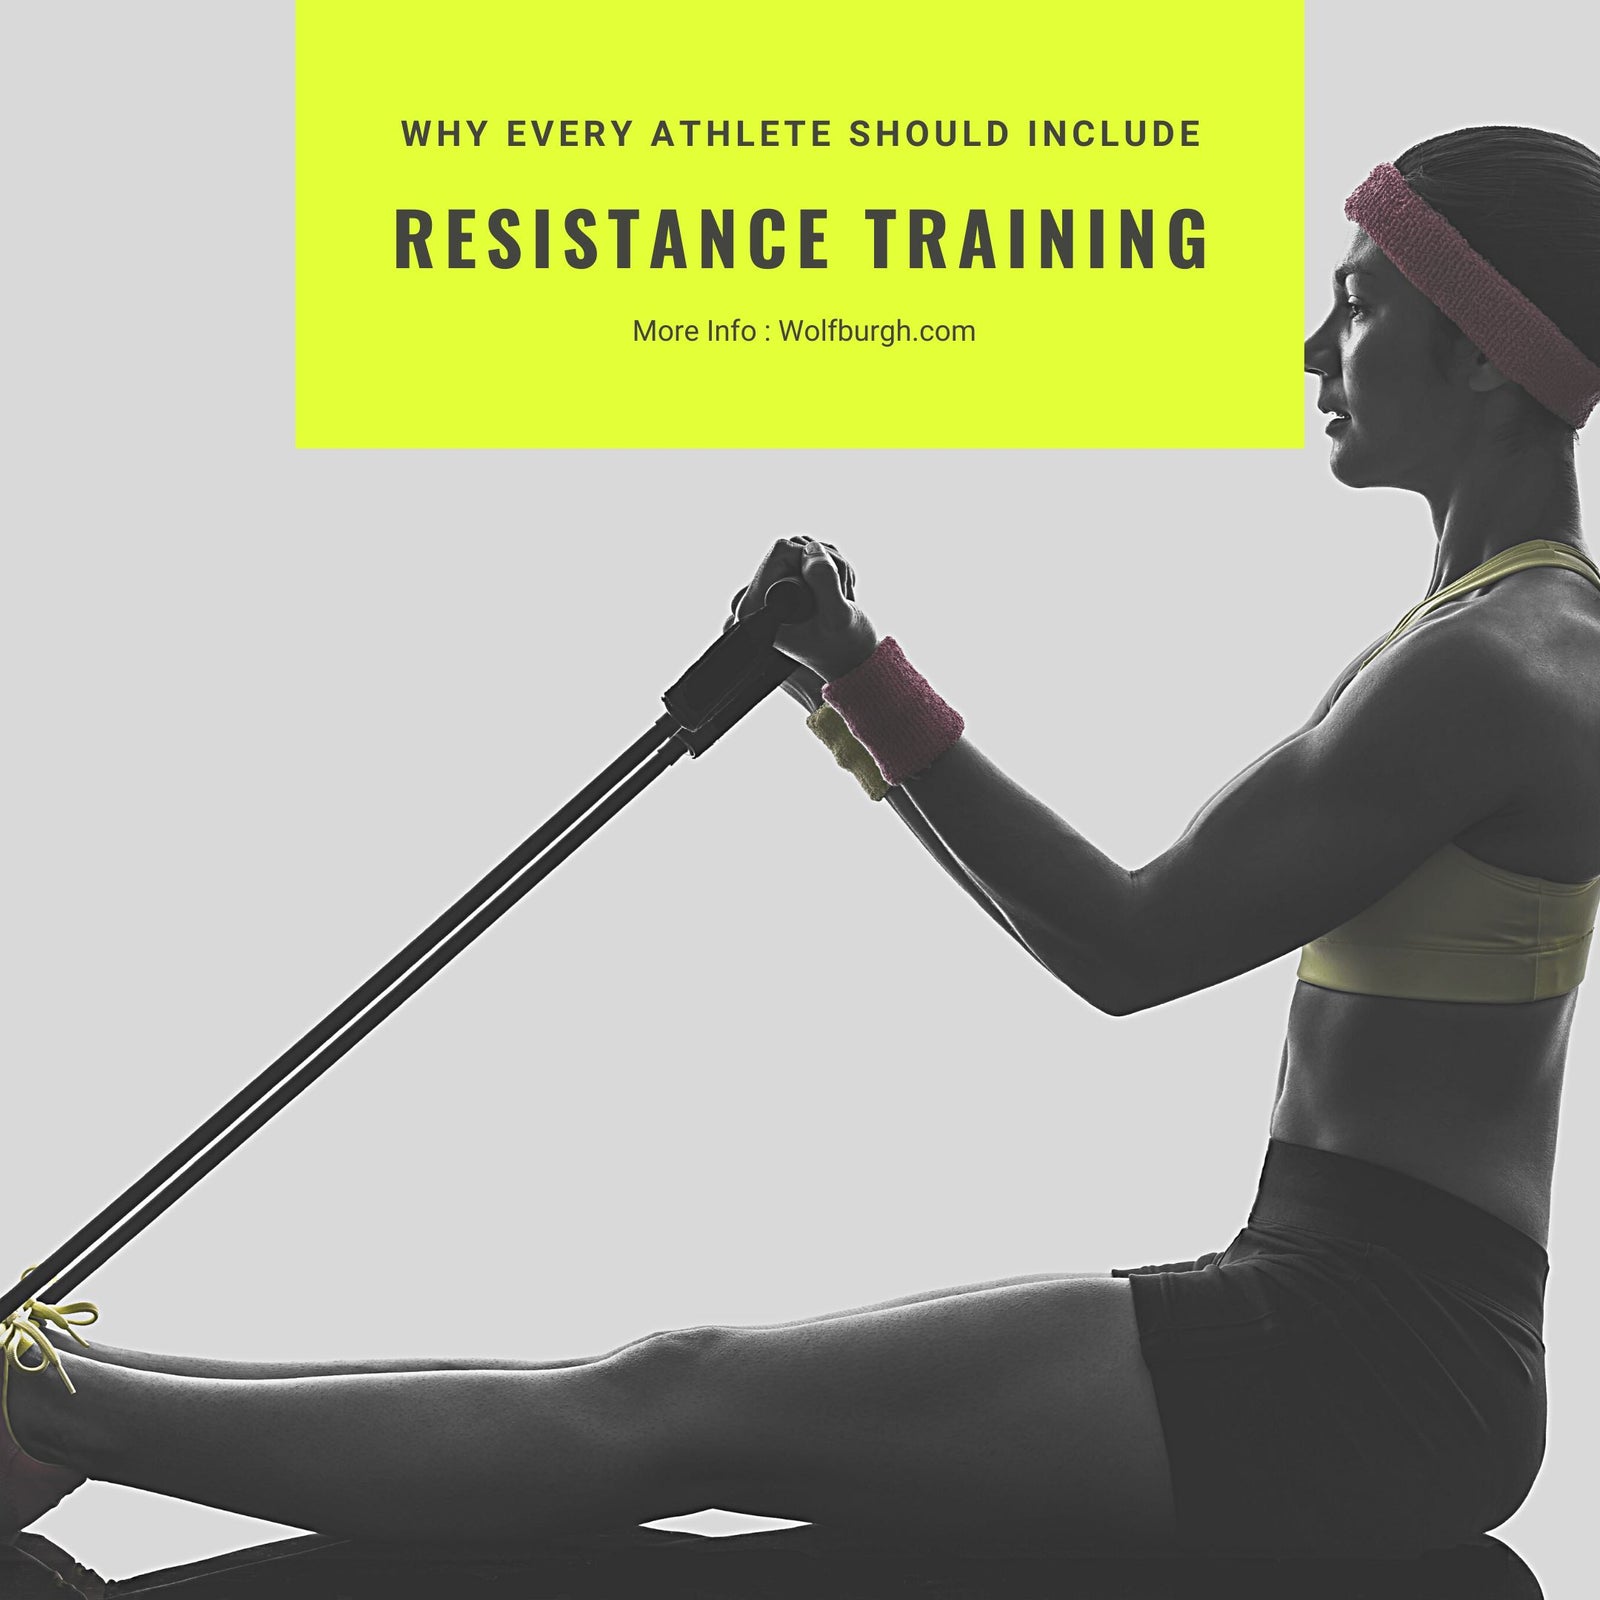 Top 5 benefits of Resistance Training - Wolfburgh Wellness